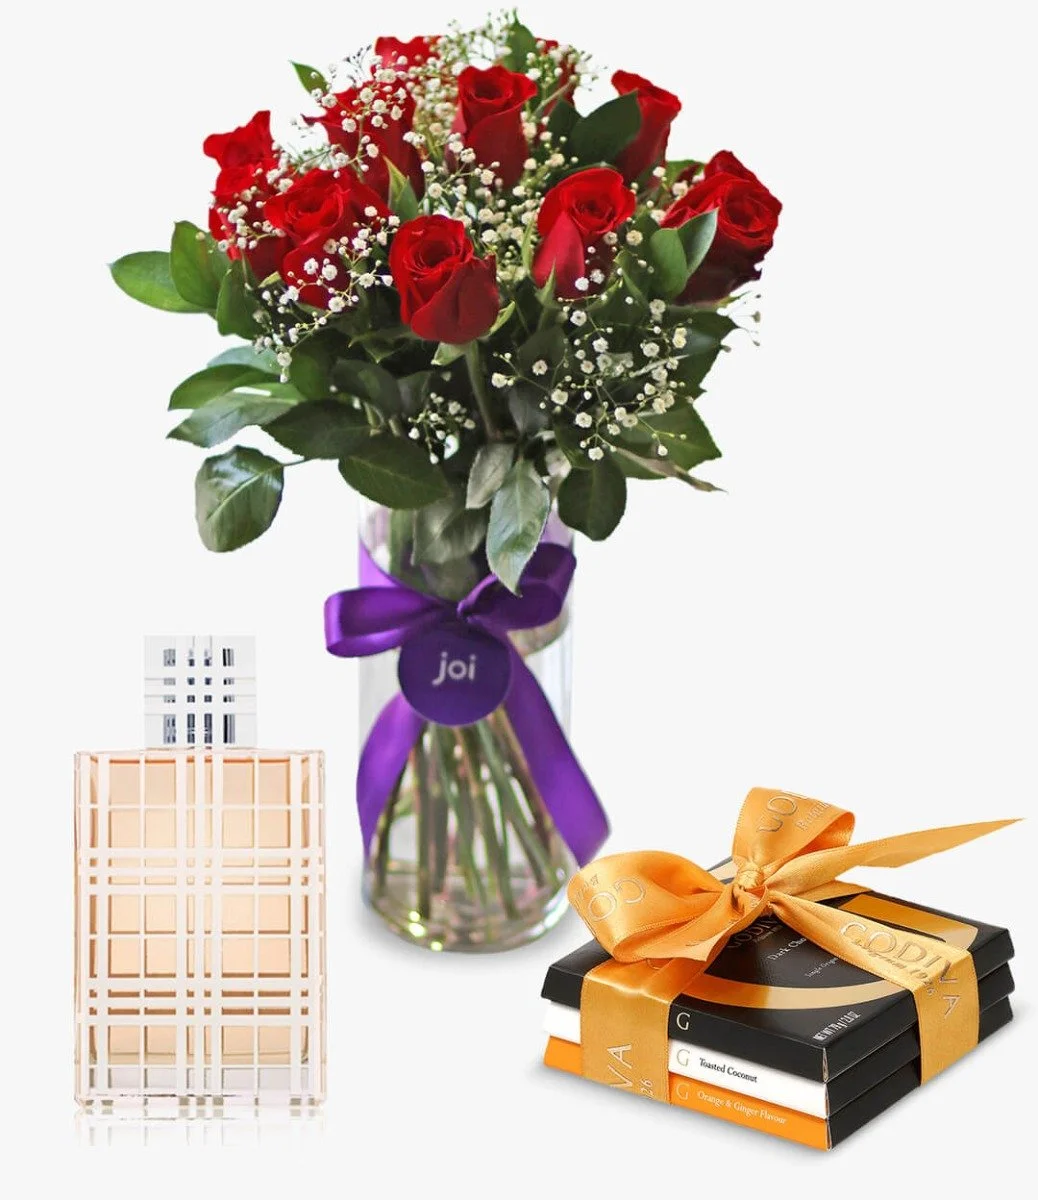 A Bundle of Roses Bouquet, Burberry's Brit Perfume, 3 Godiva G Tablets